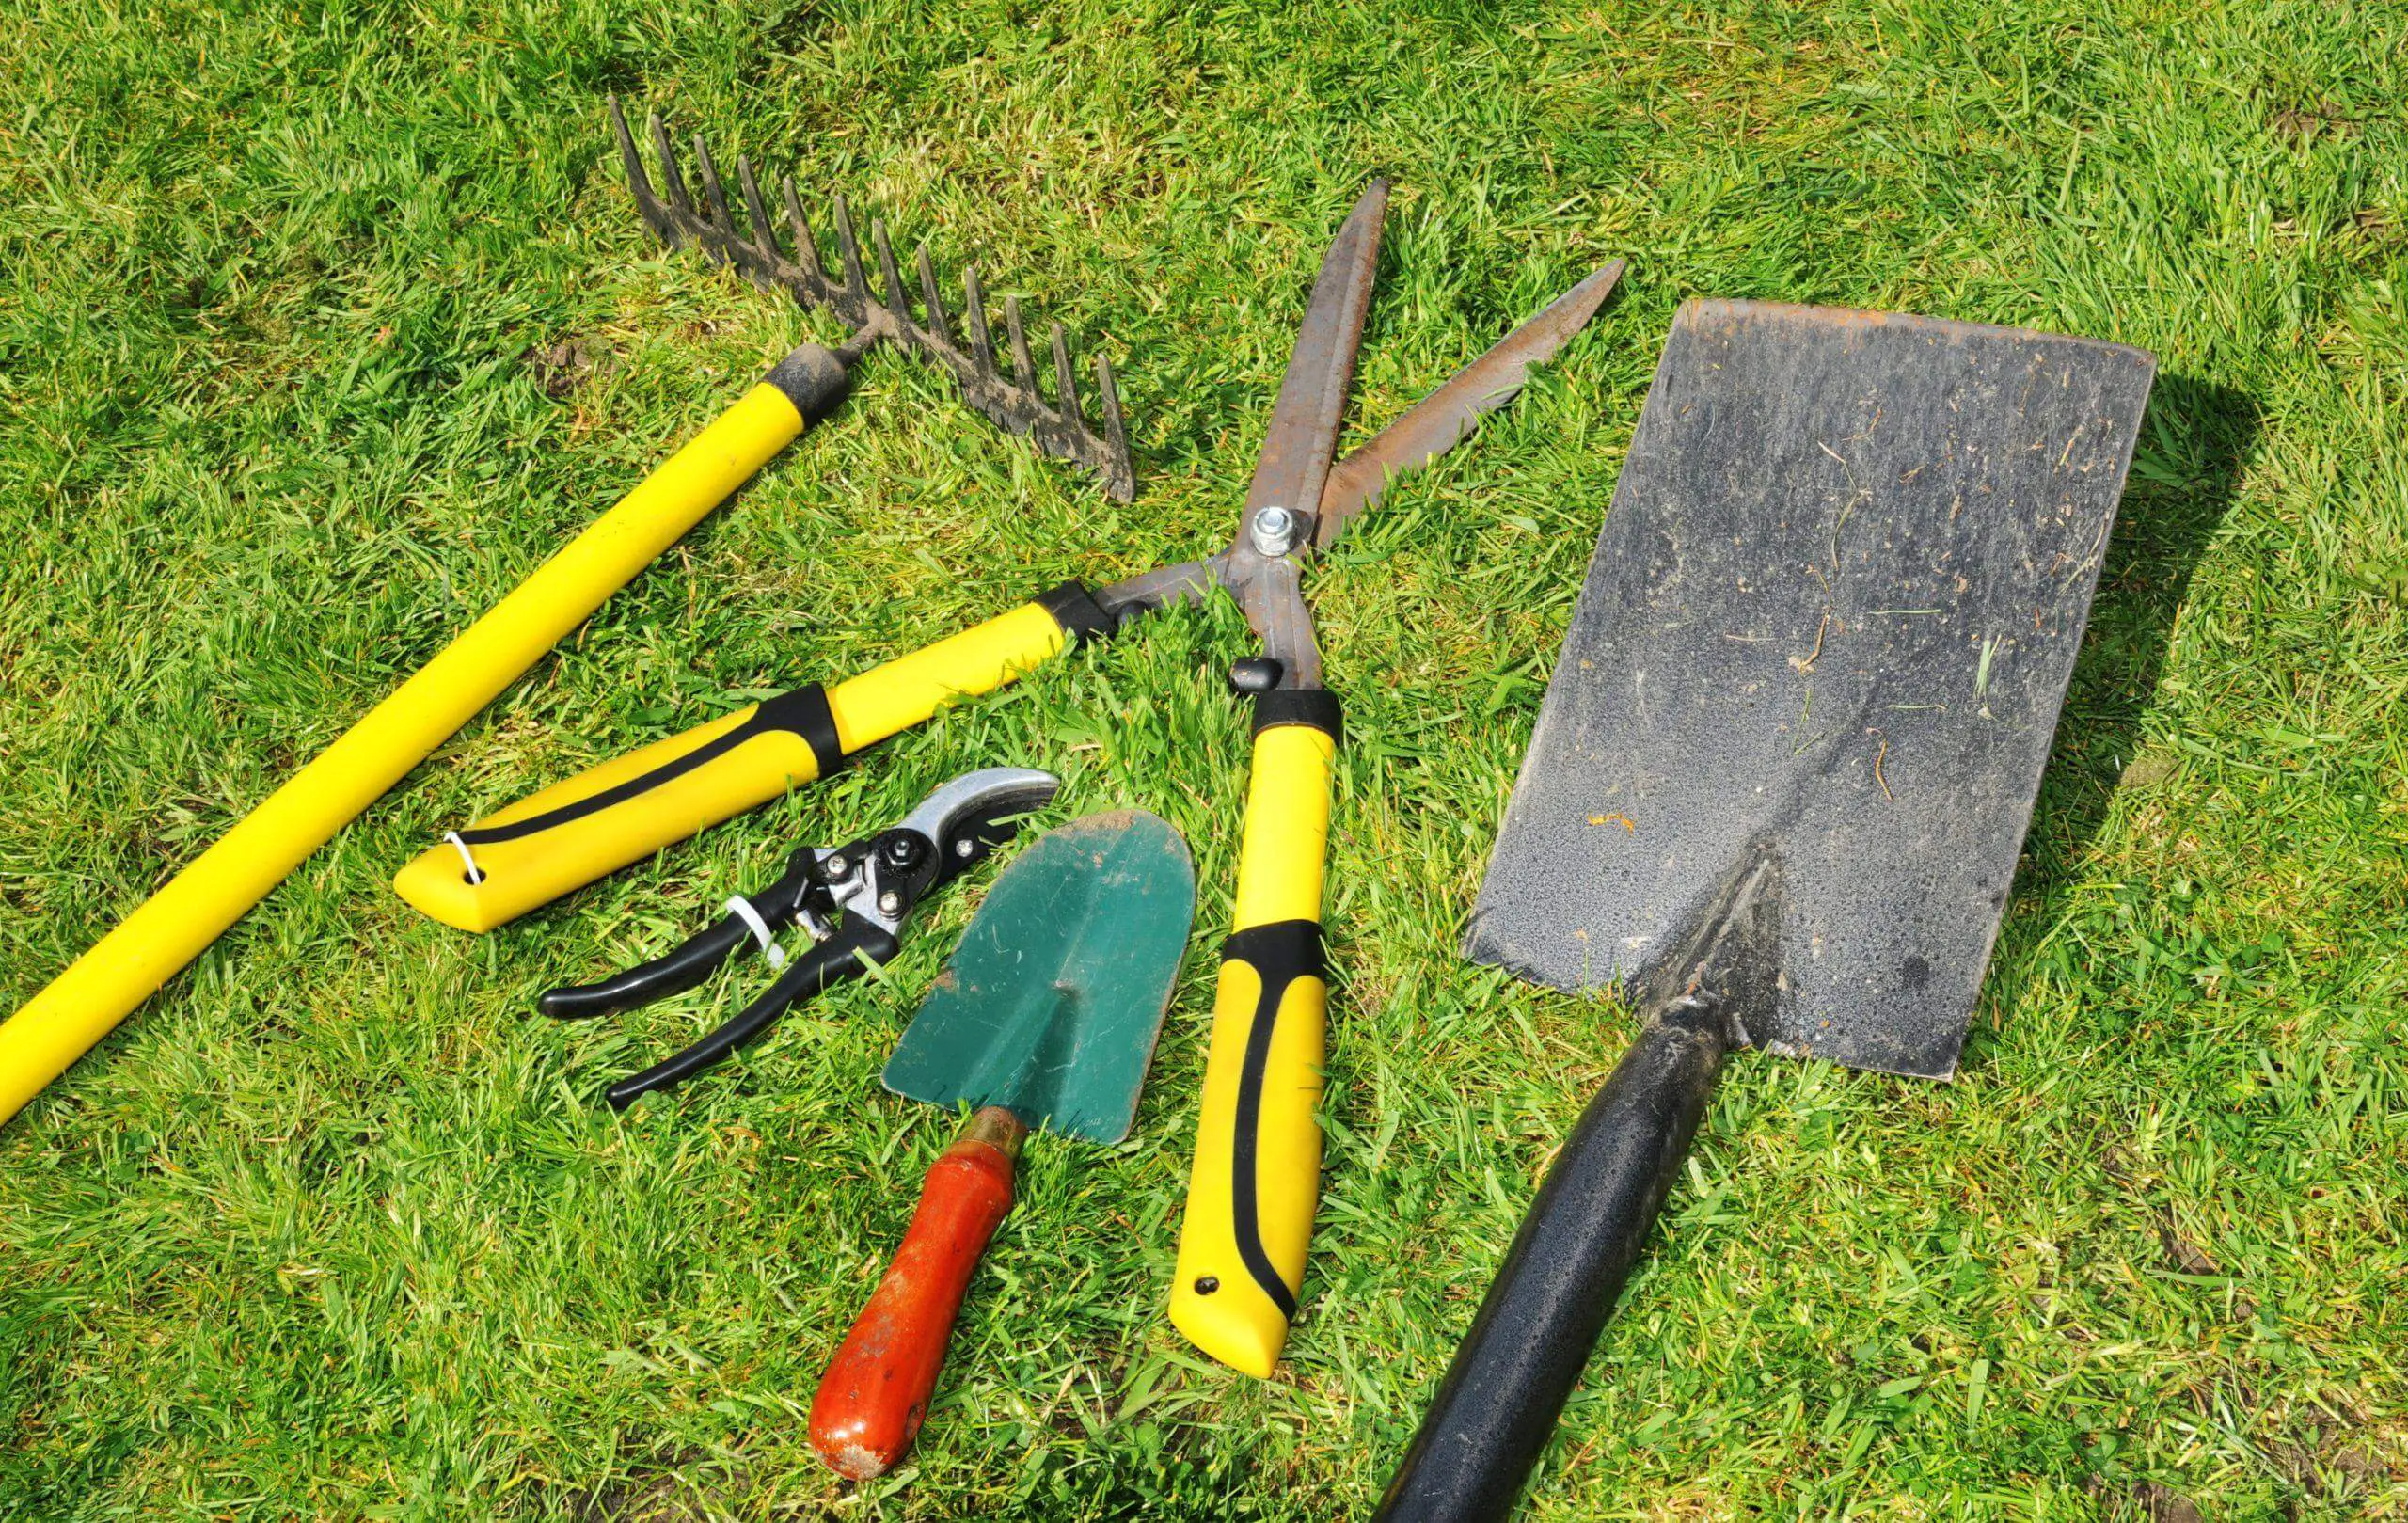 Selection of the main garden tools to clear the site from invasive weeds